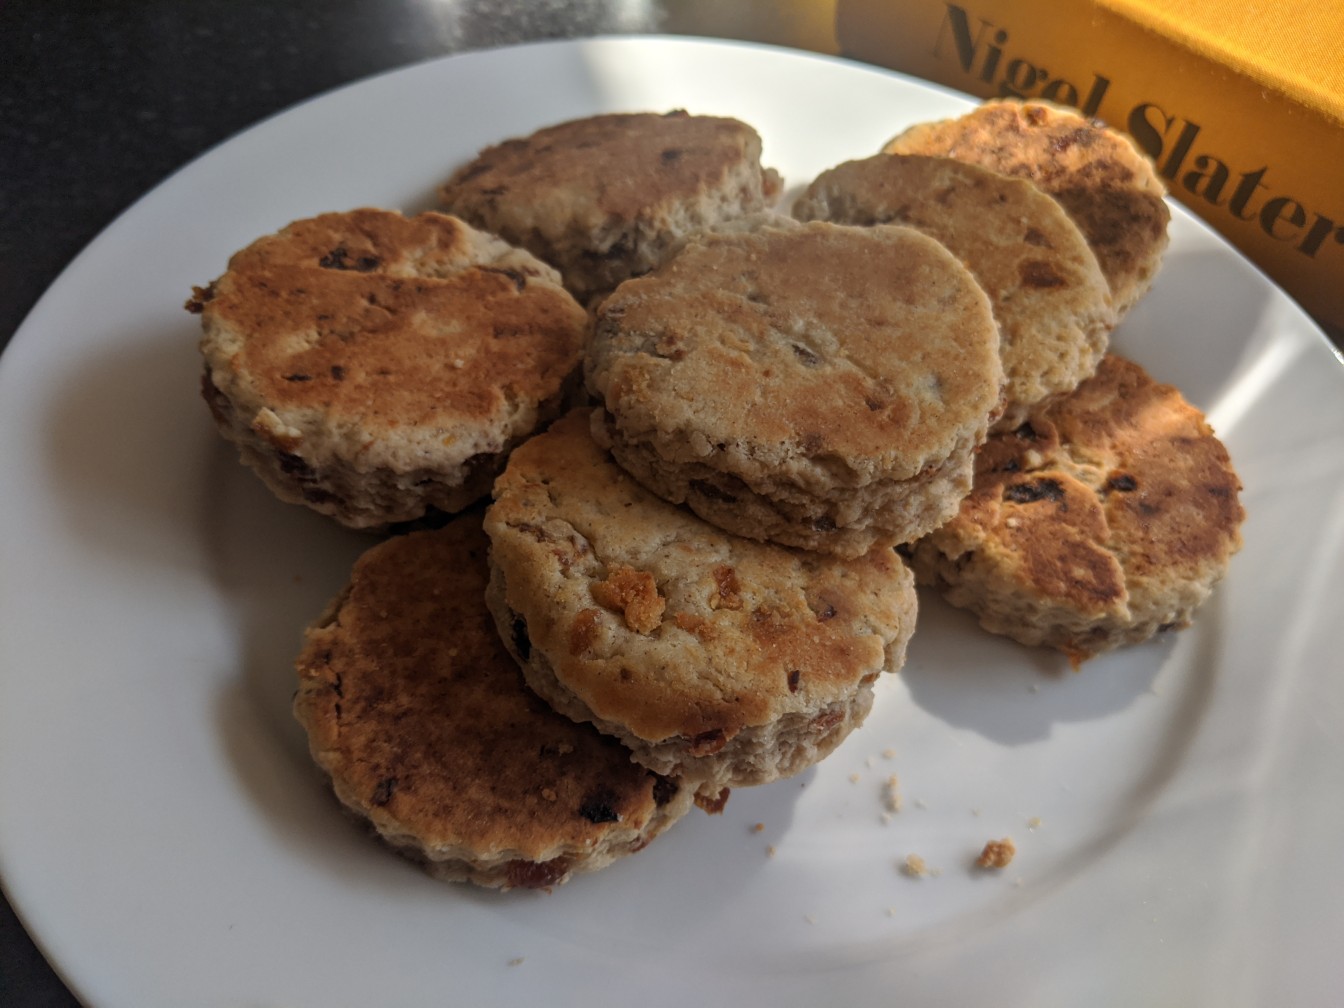 Girdle scones on a plate